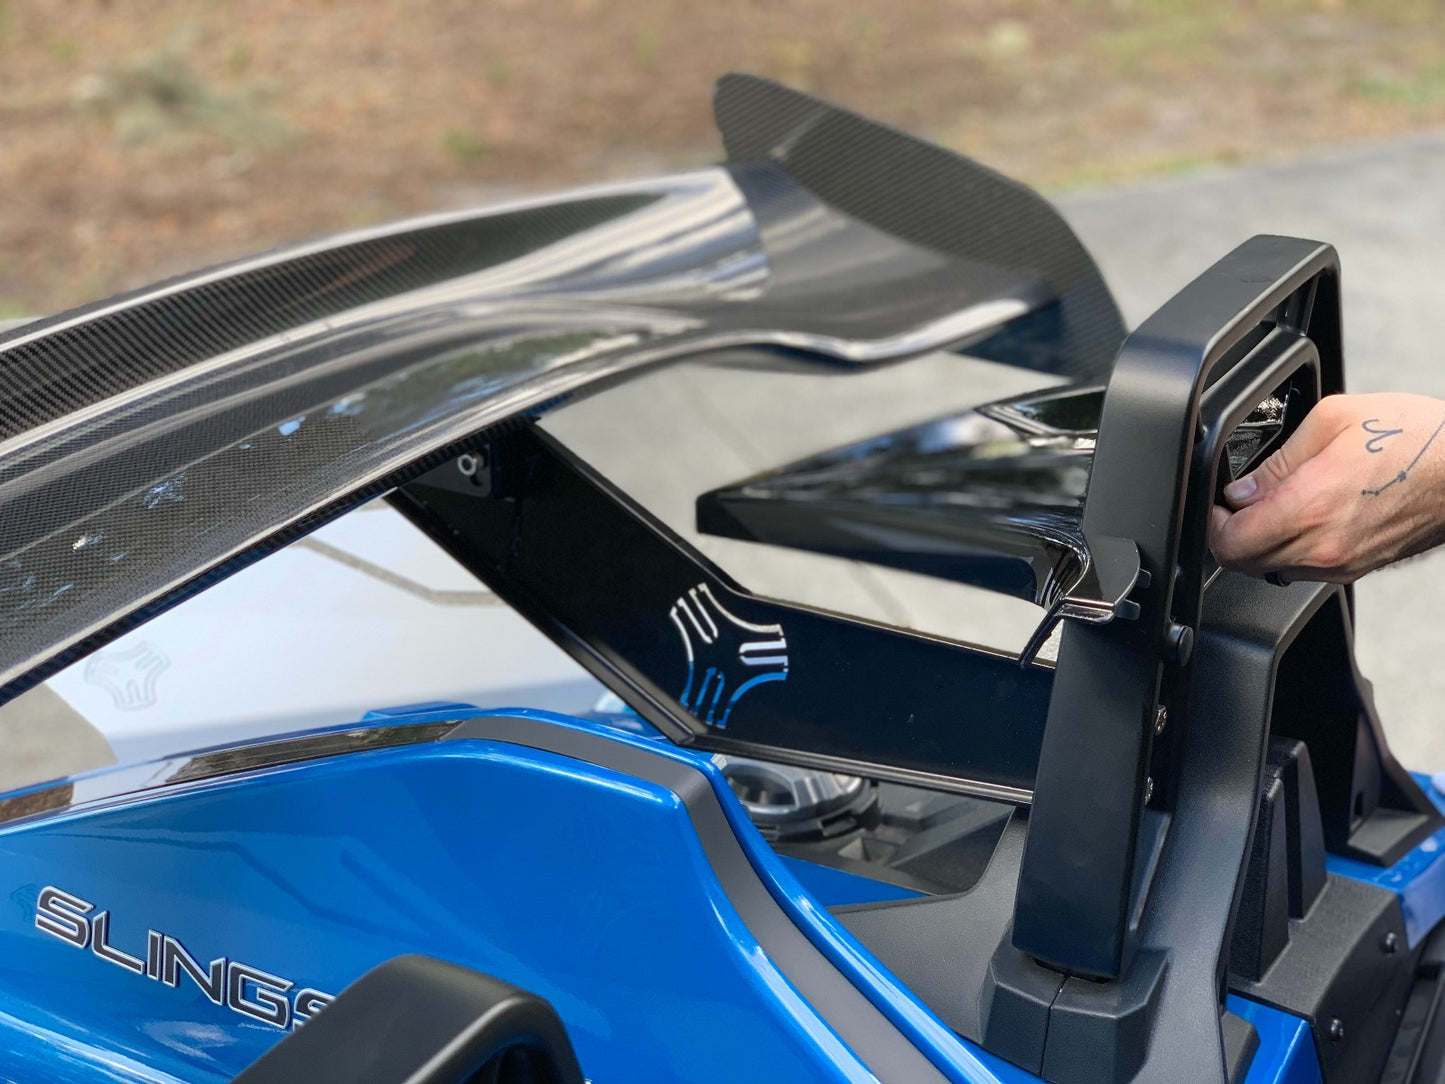 TWIST DYNAMICS REAR WING KIT FOR THE POLARIS SLINGSHOT - LARGE CARBON FIBER WING WITH BRACKETS